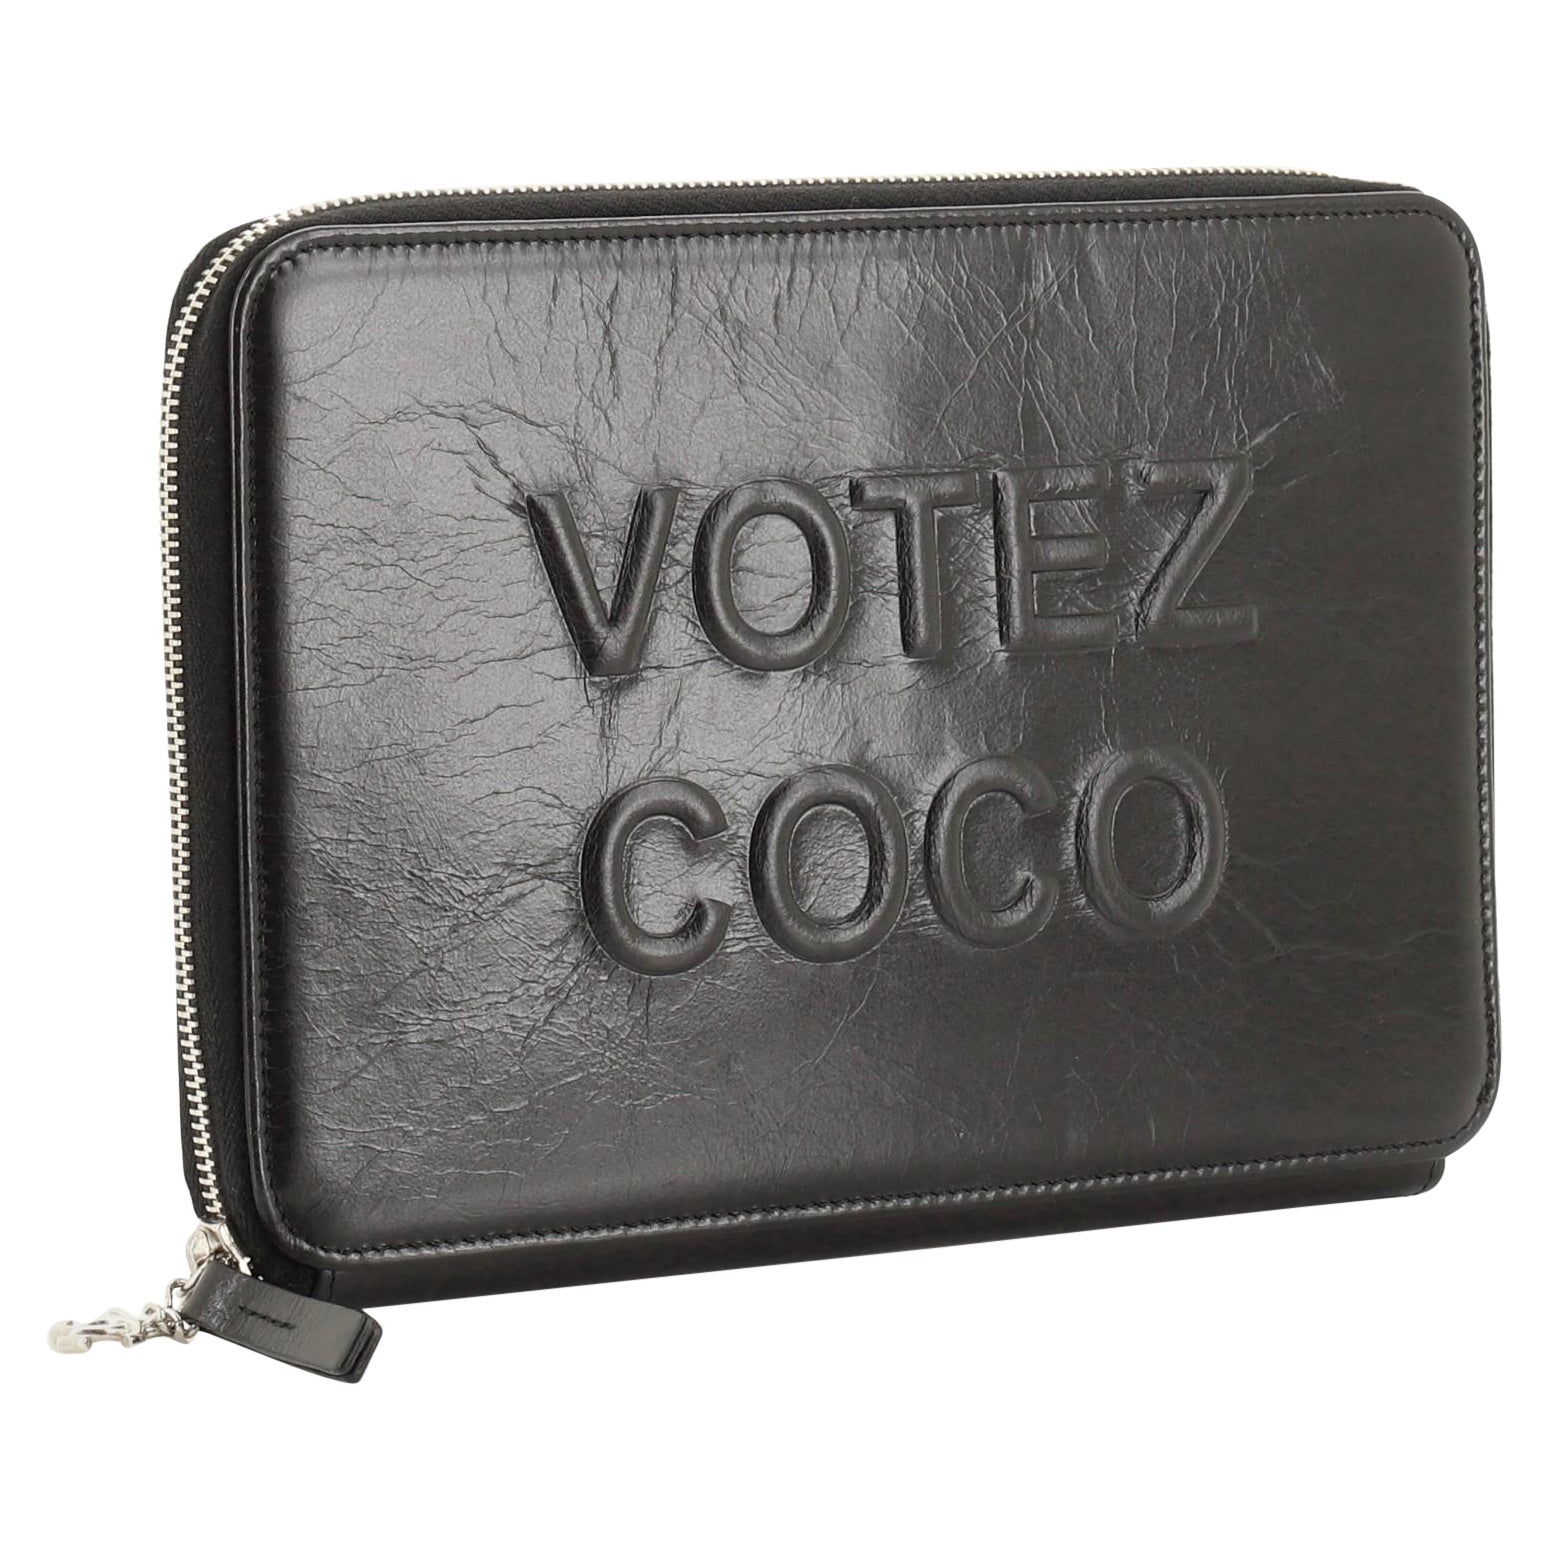 Chanel Votez Coco Clutch Embossed Leather Black